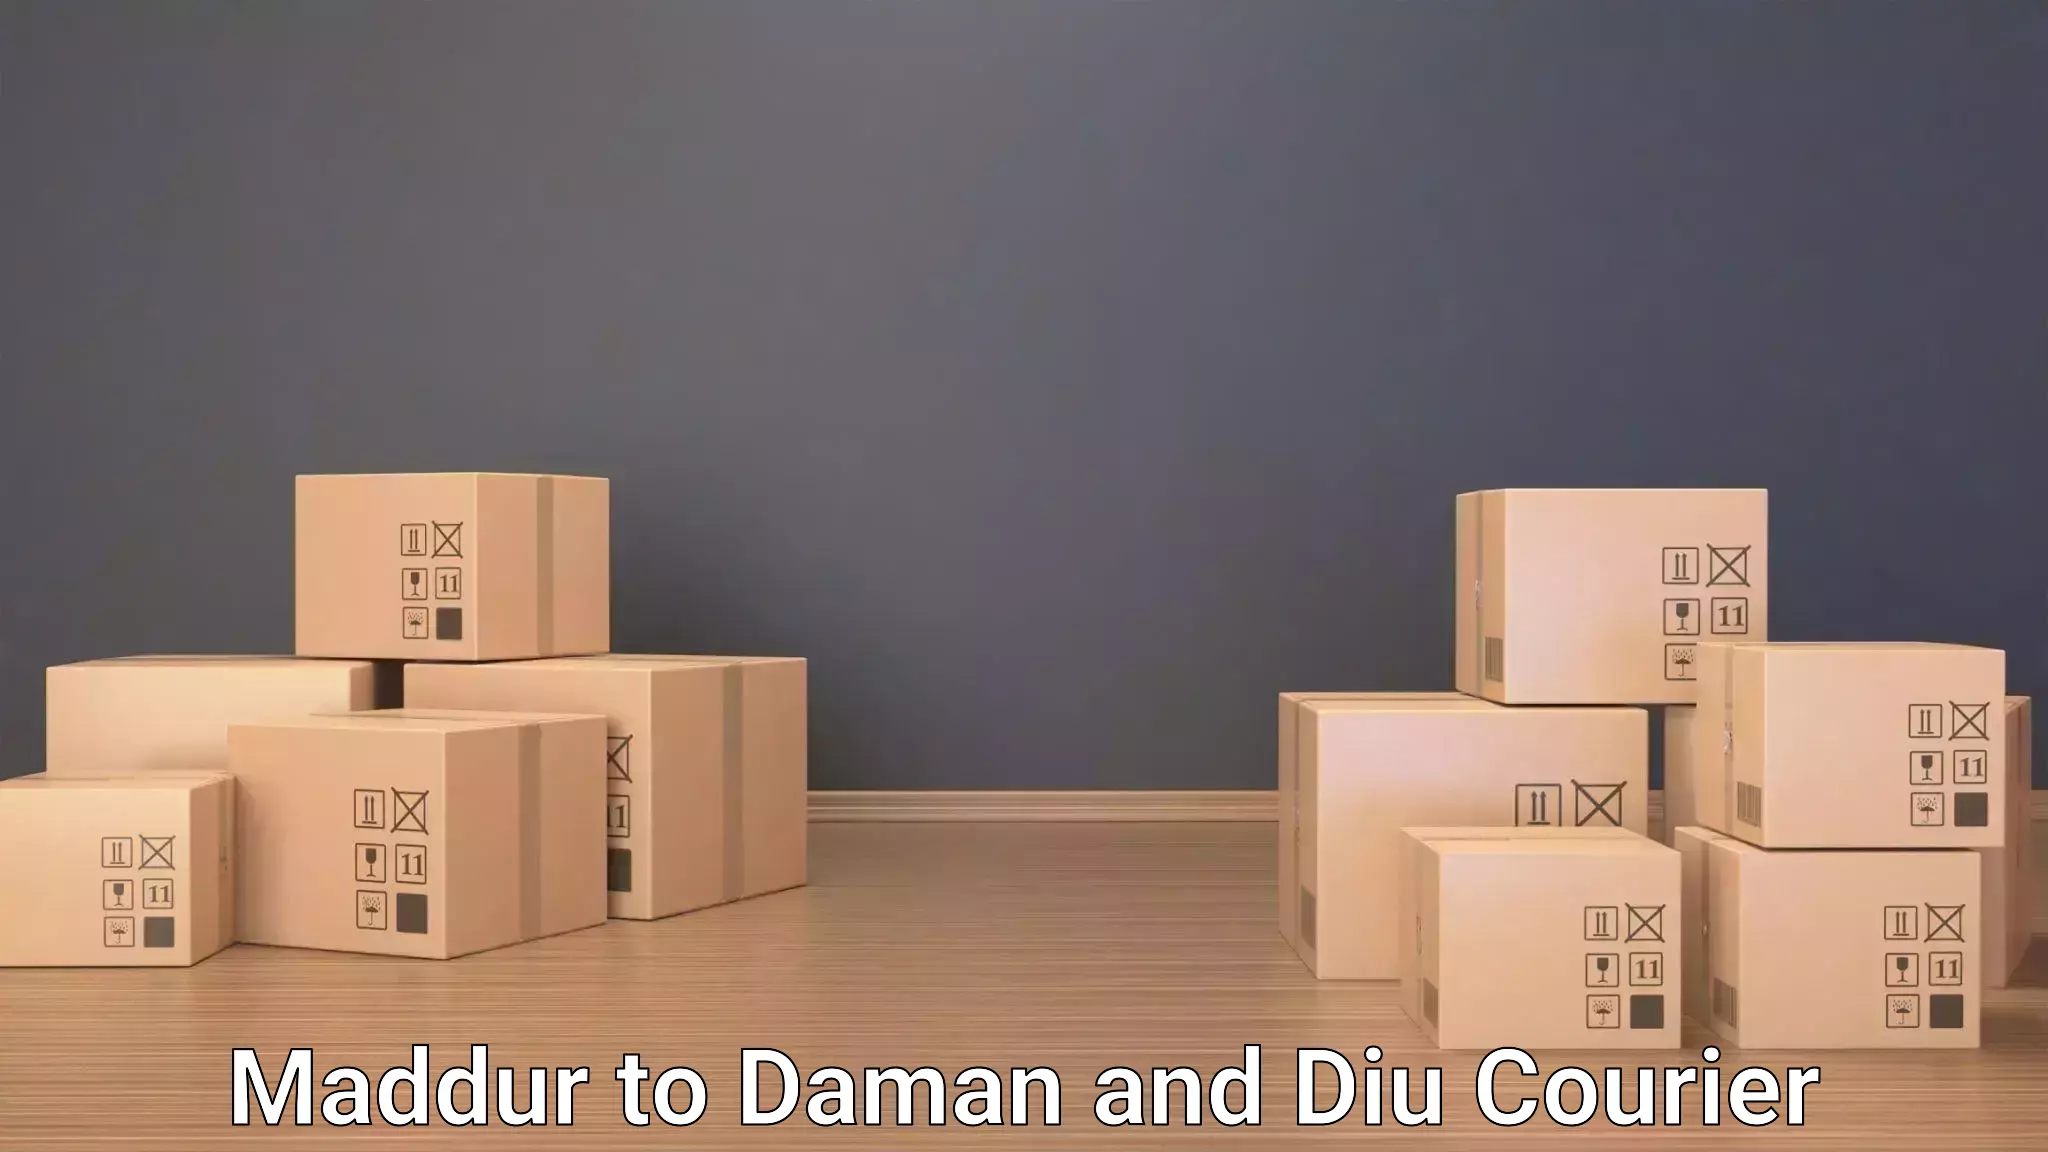 Baggage relocation service Maddur to Daman and Diu